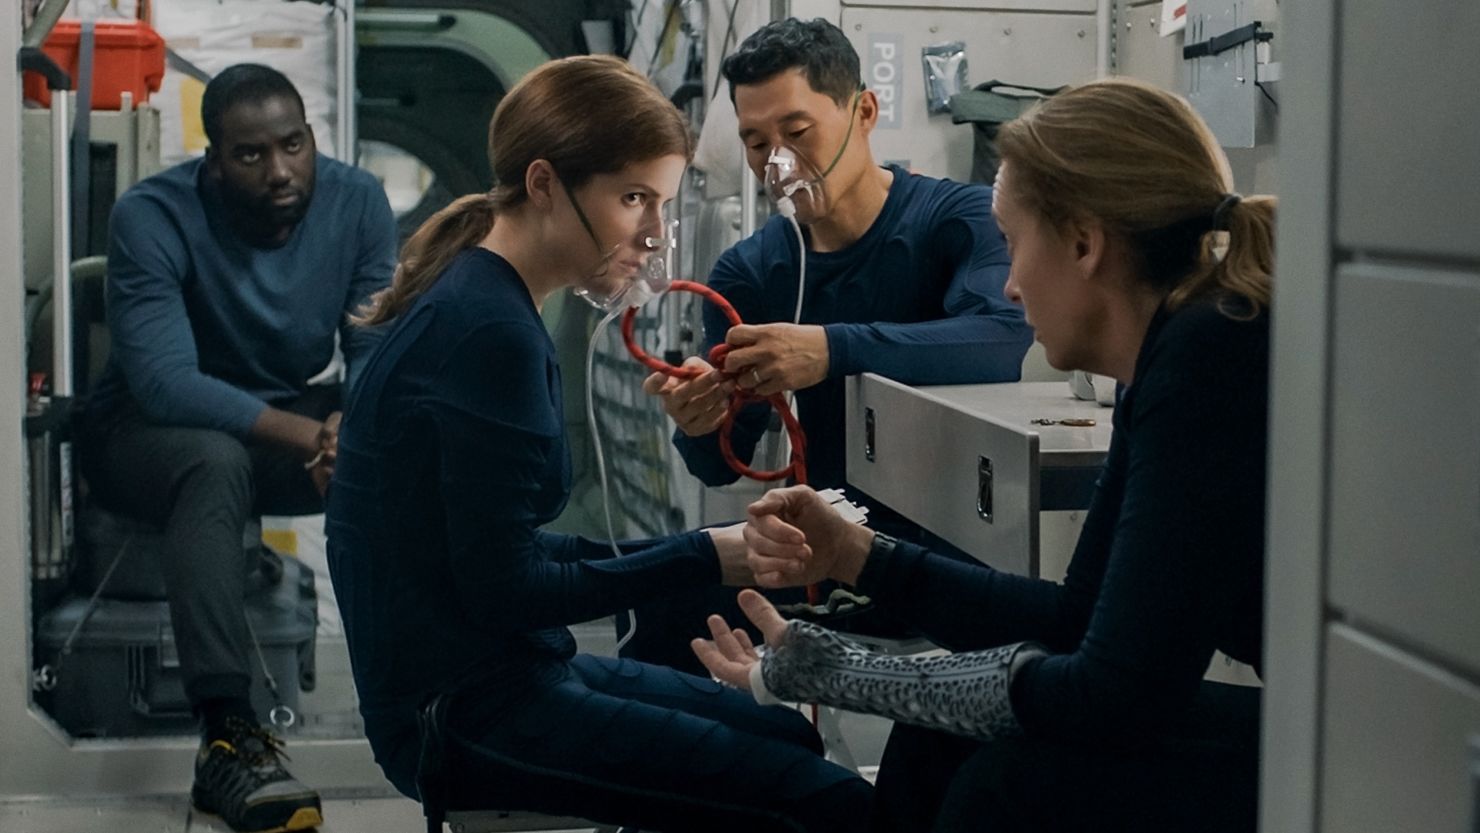 Shamier Anderson, Anna Kendrick, Daniel Dae Kim and Toni Collette in 'Stowaway' (Stowaway Productions, LLC, Augenschein Filmproduktion GmbH, RISE Filmproduktion GmbH).